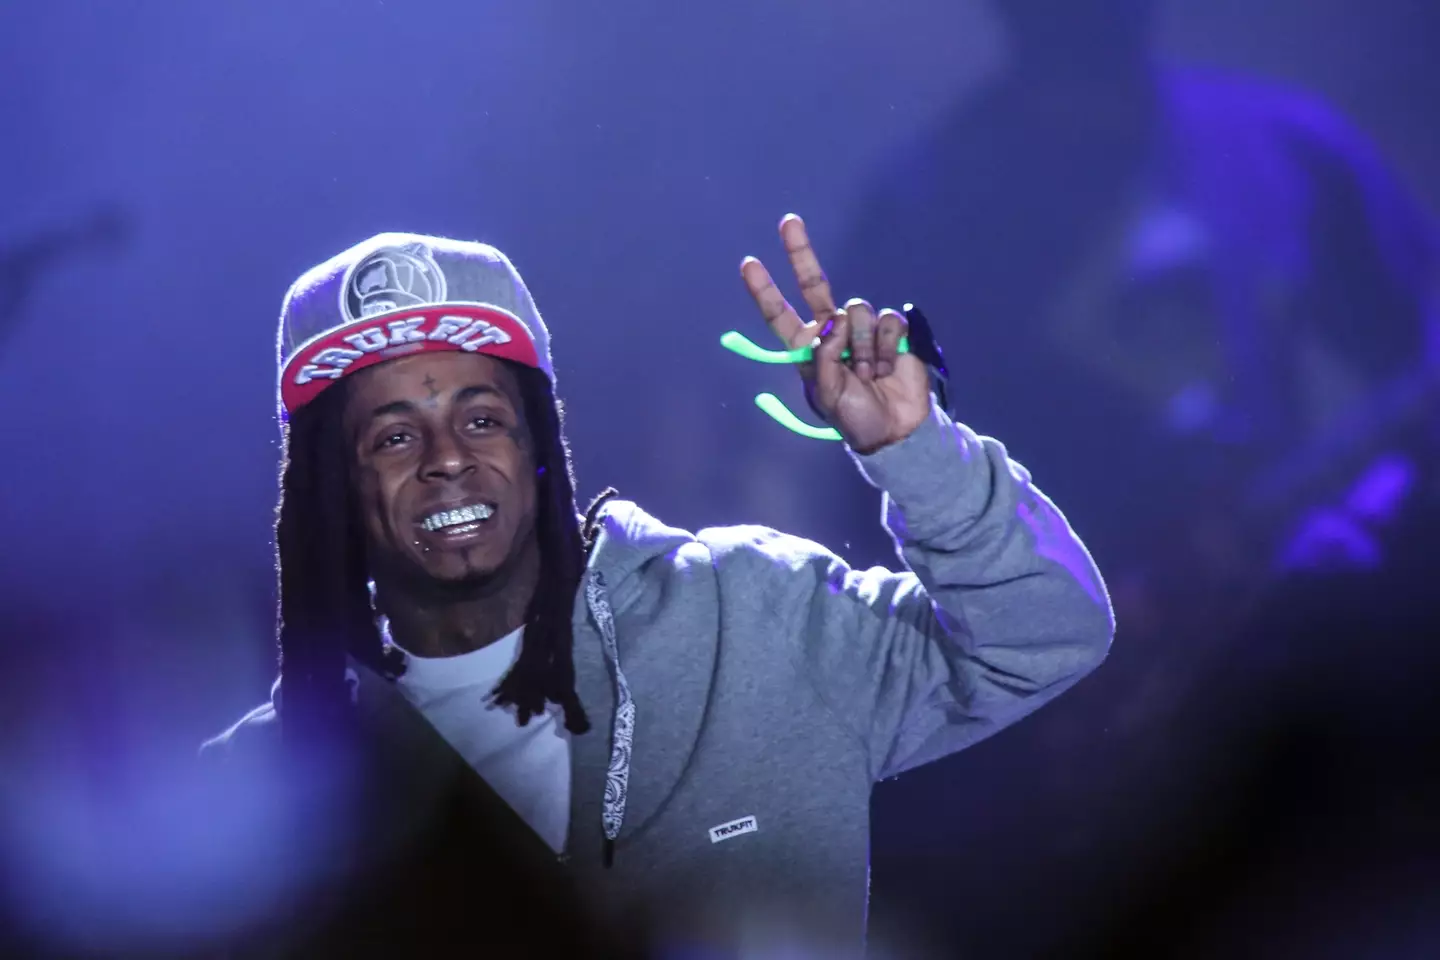 Lil Wayne will no longer be playing at Strawberries and Creem festival.